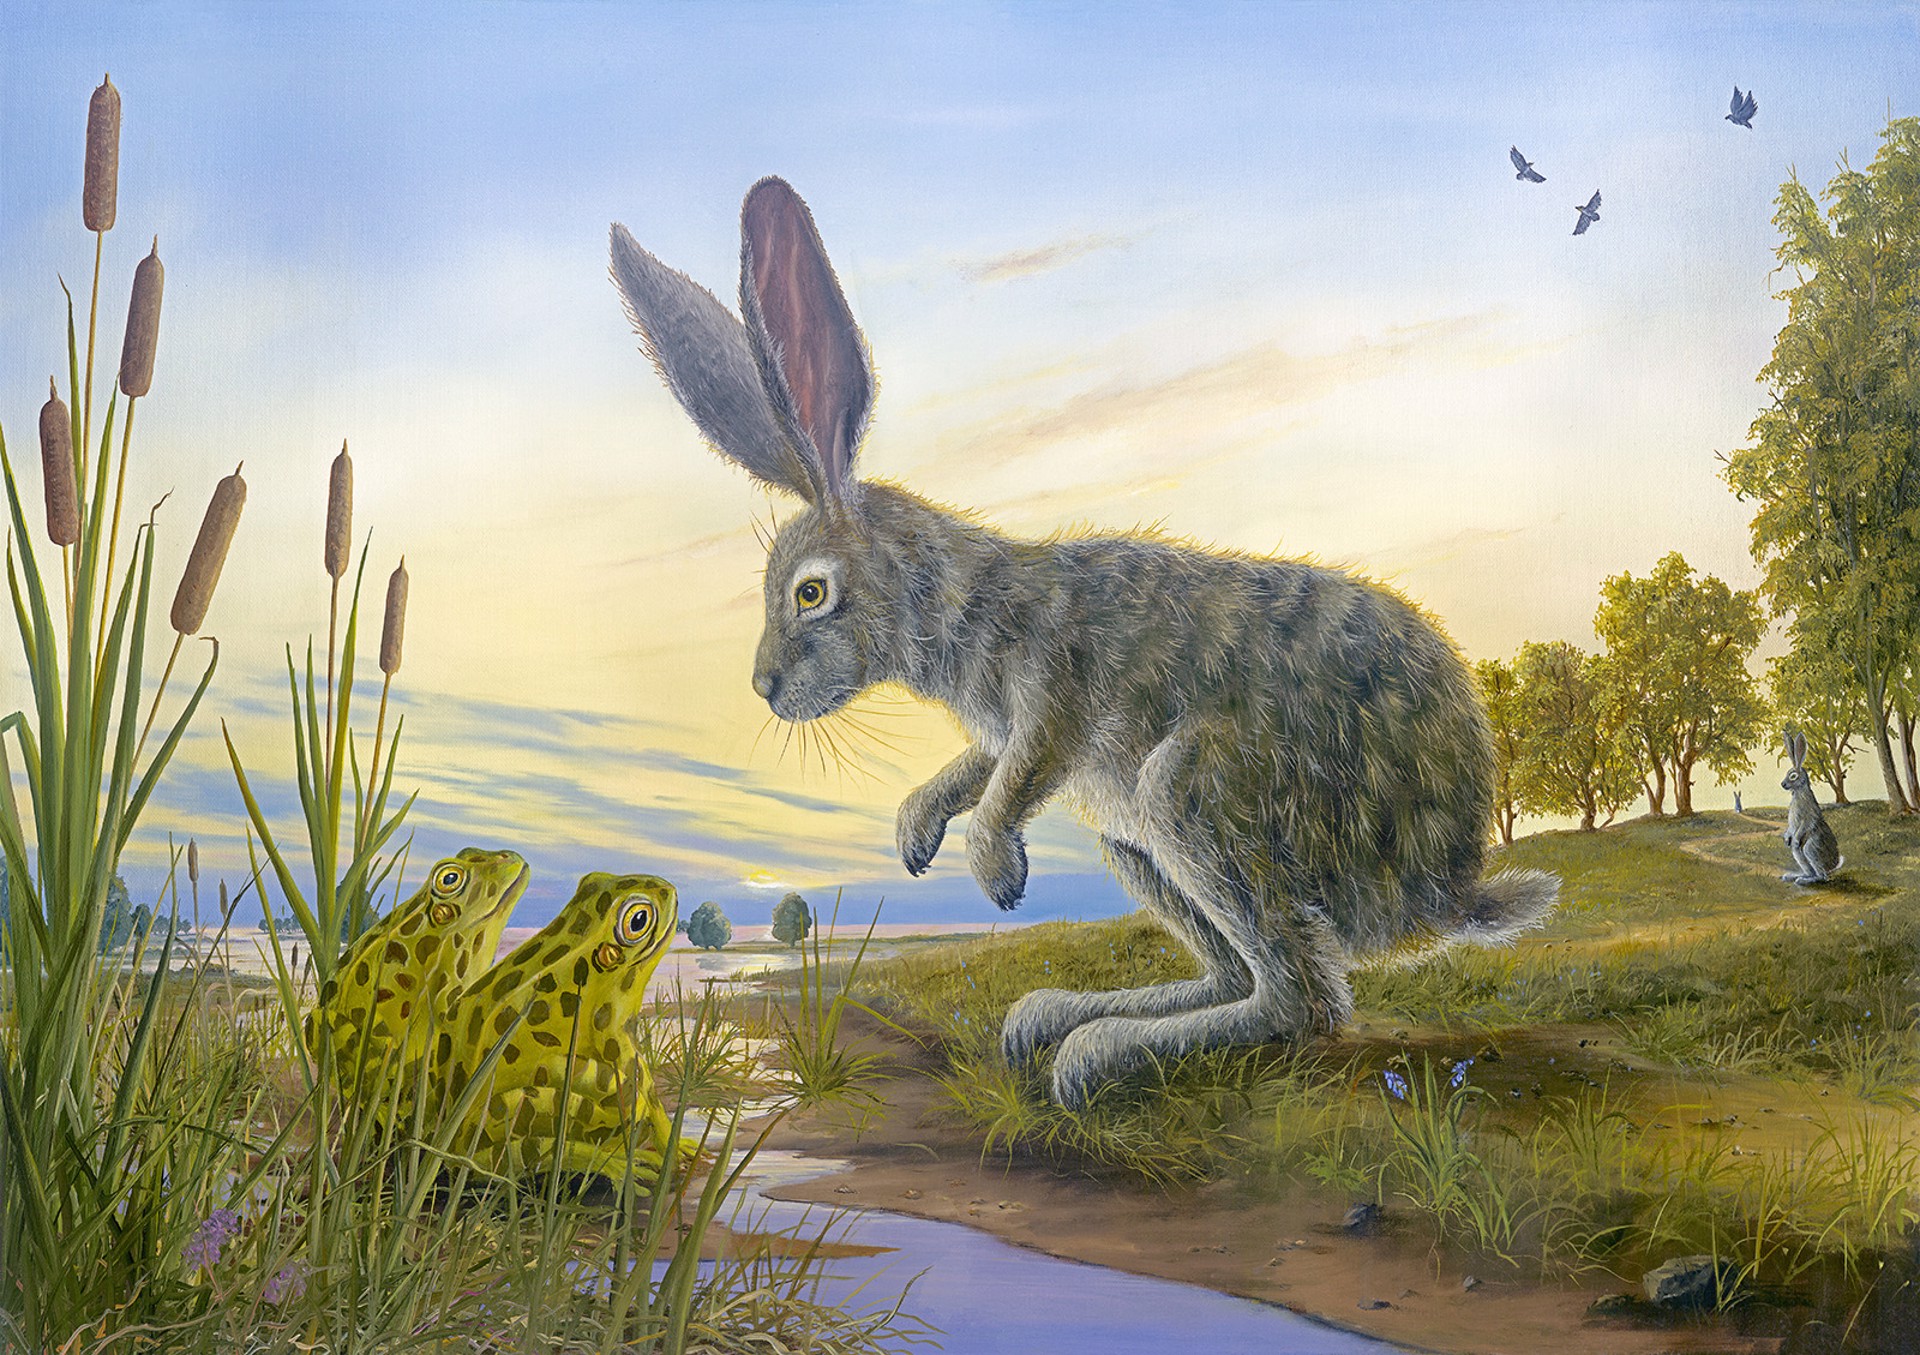 The Resolve by Robert Bissell